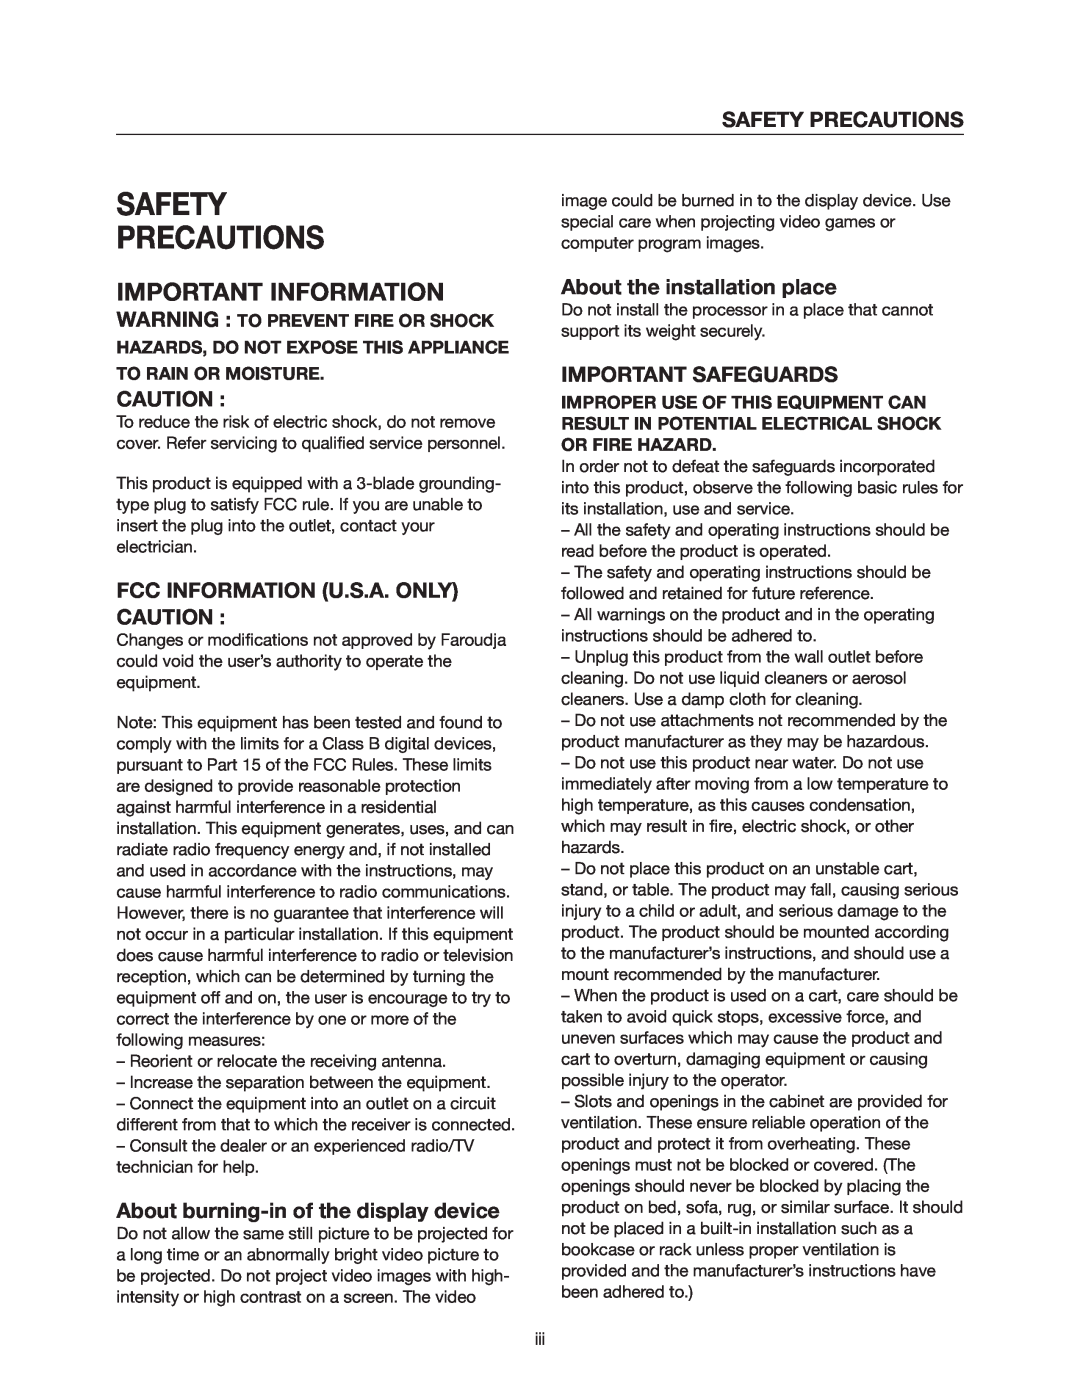 Meridian Audio DVP1500 manual Safety Precautions, Important Information, Fcc Information U.S.A. Only, Important Safeguards 